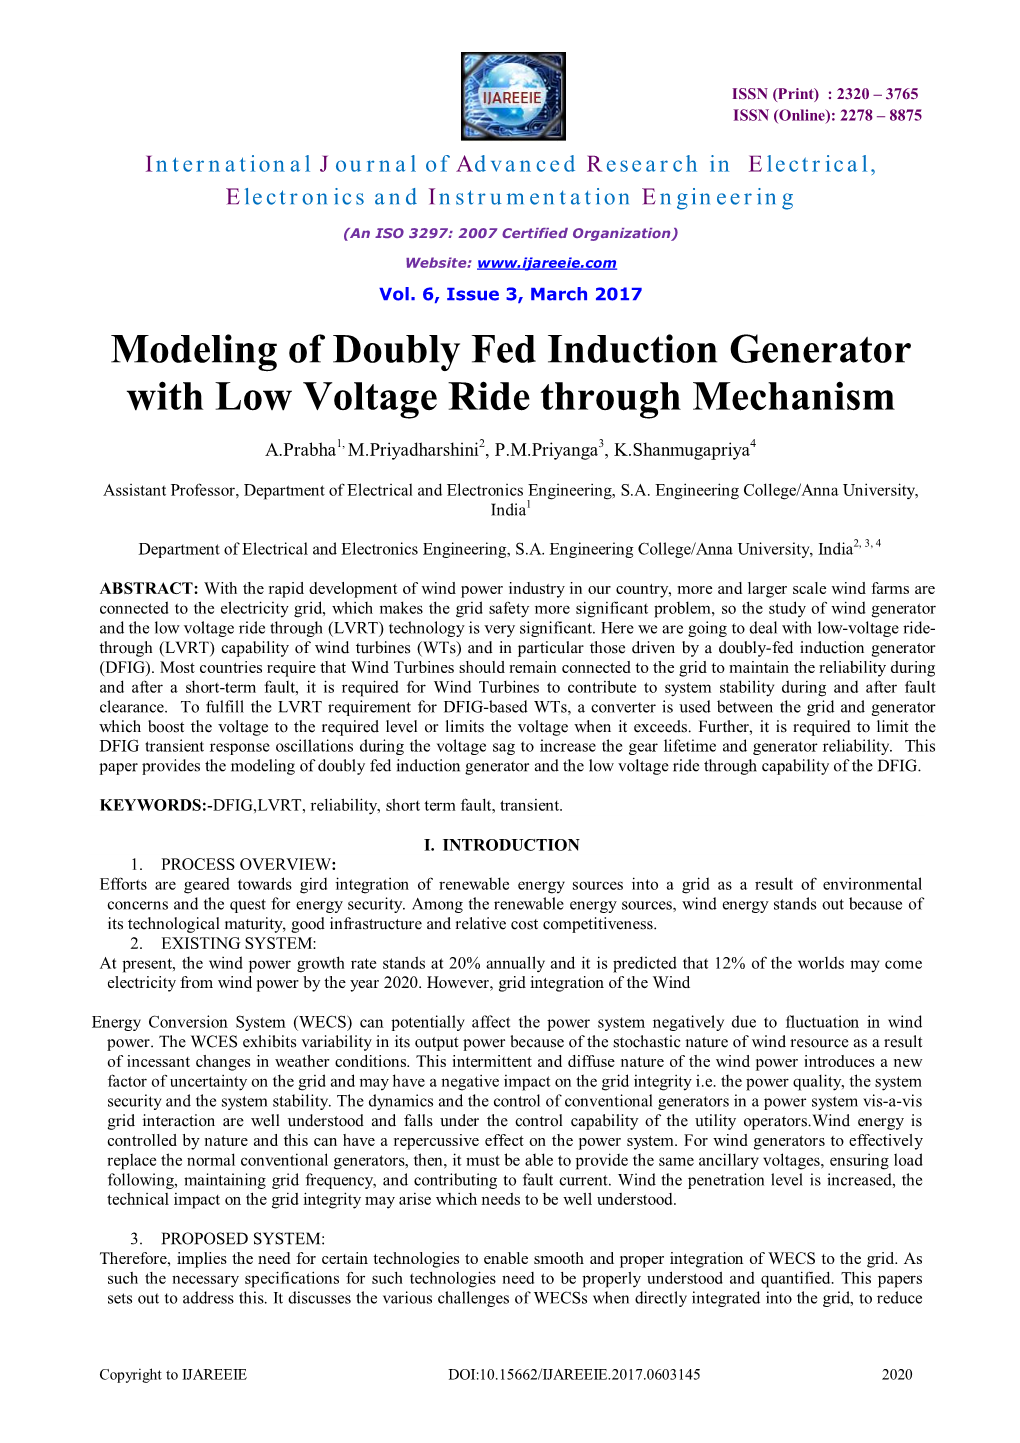 Modeling of Doubly Fed Induction Generator with Low Voltage Ride Through Mechanism